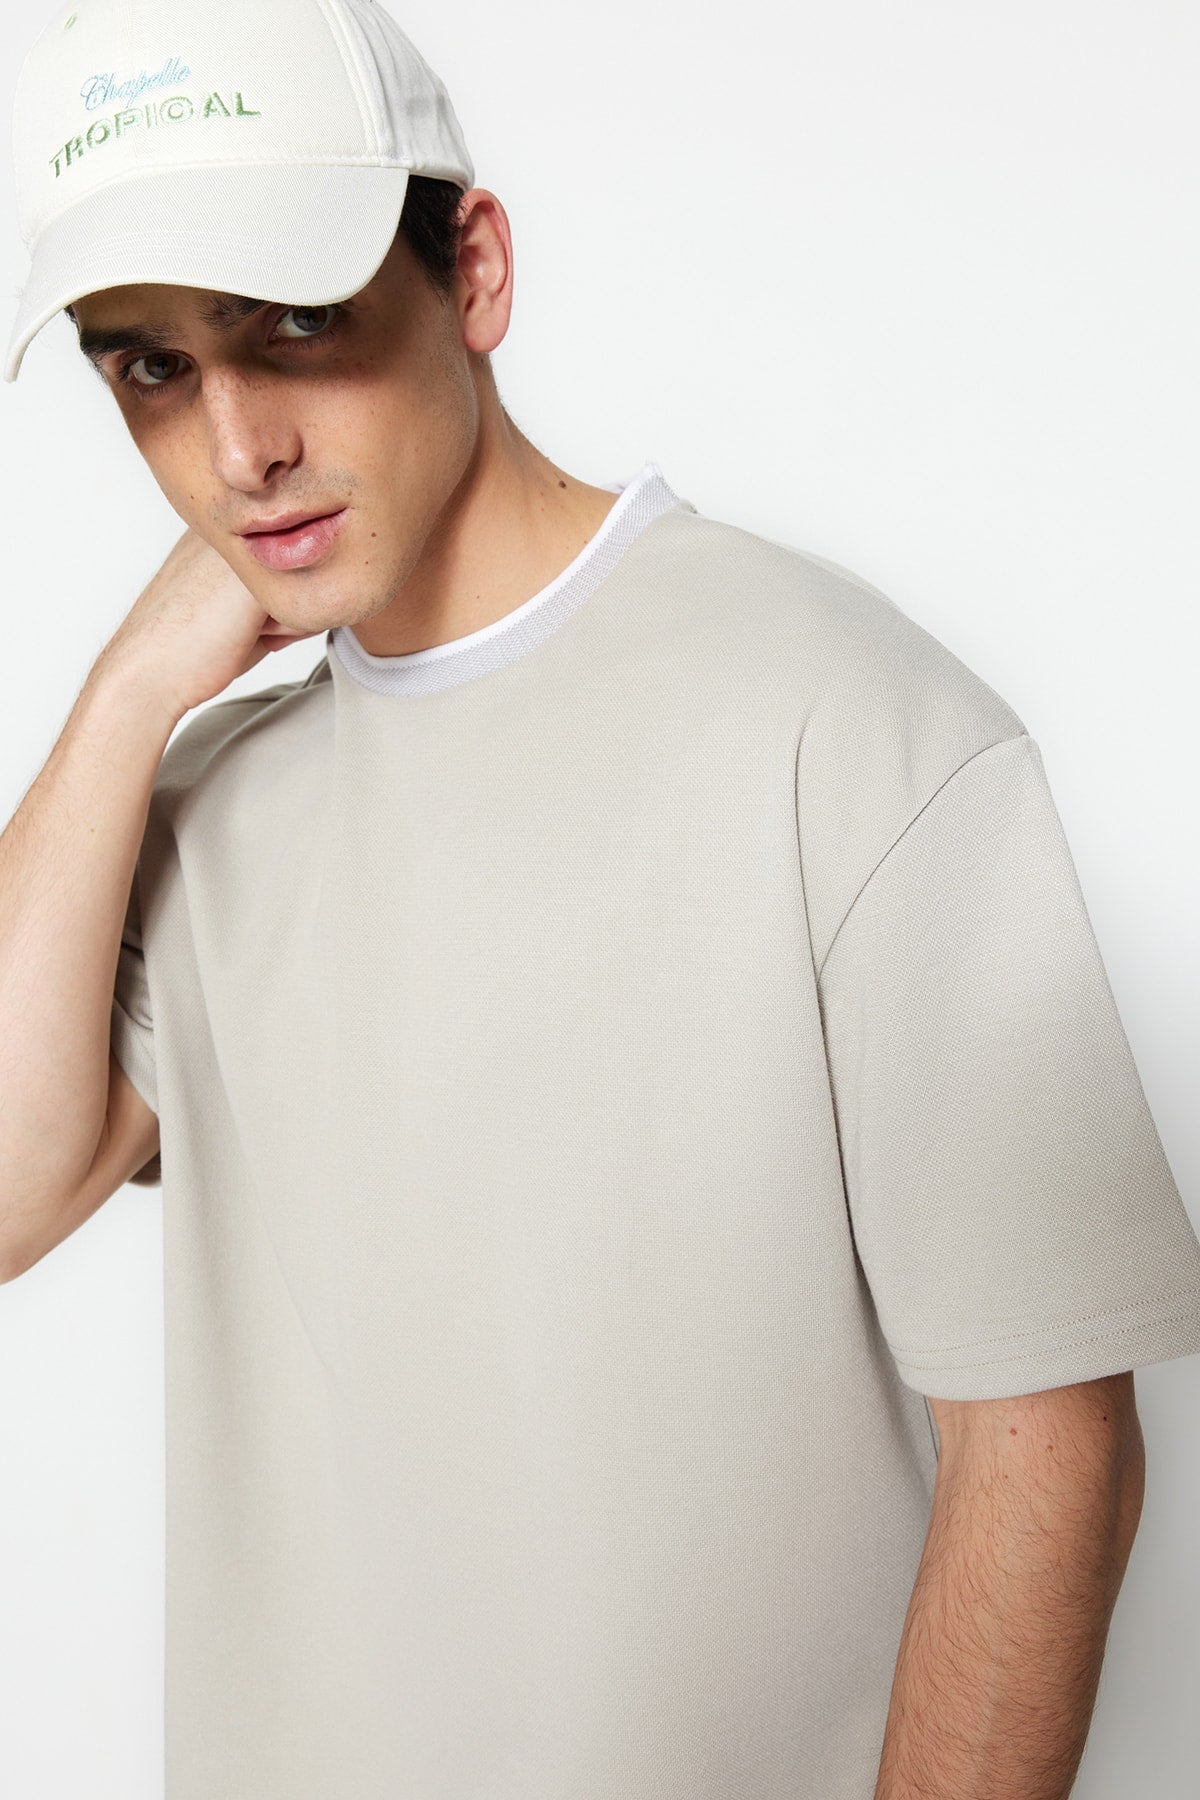 Limited Edition Taş Men's Relaxed/Comfortable Cut Knitwear Banded Short Sleeve Textured Pique T-Shirt